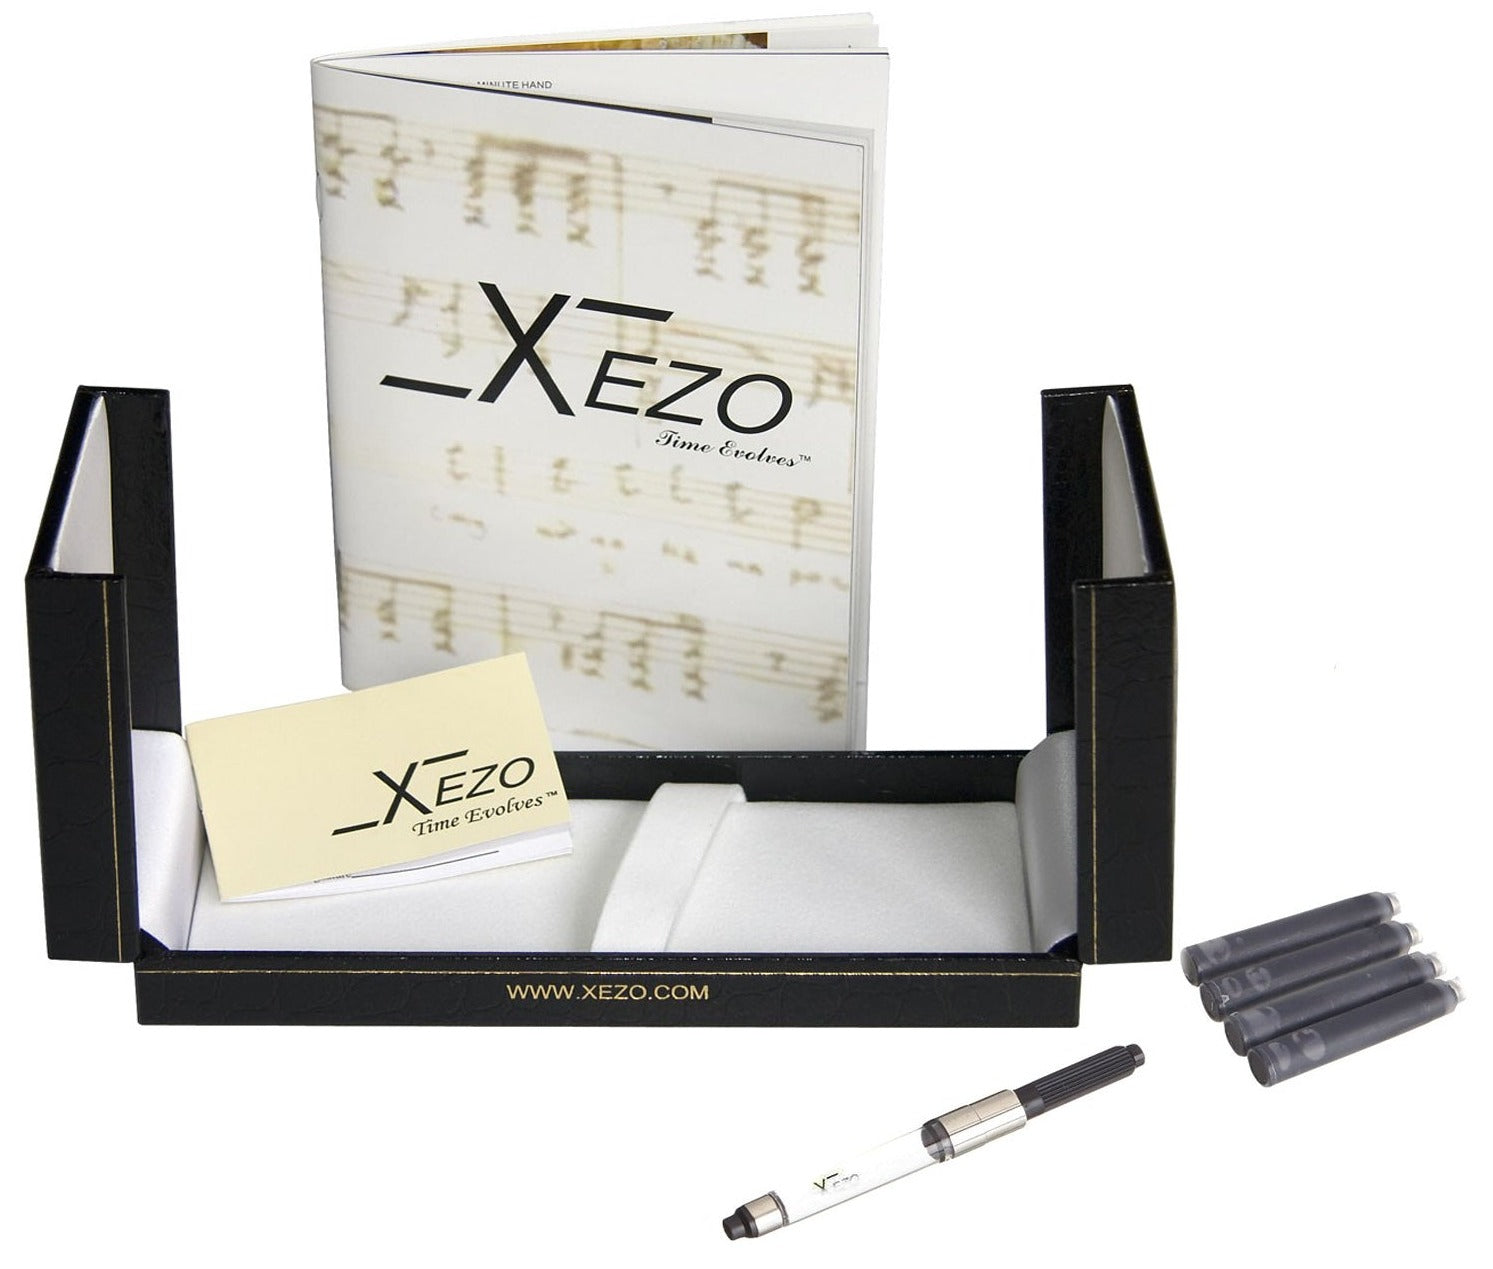 Xezo - Black gift box, certificate, manual, ink converter, and four ink cartridges